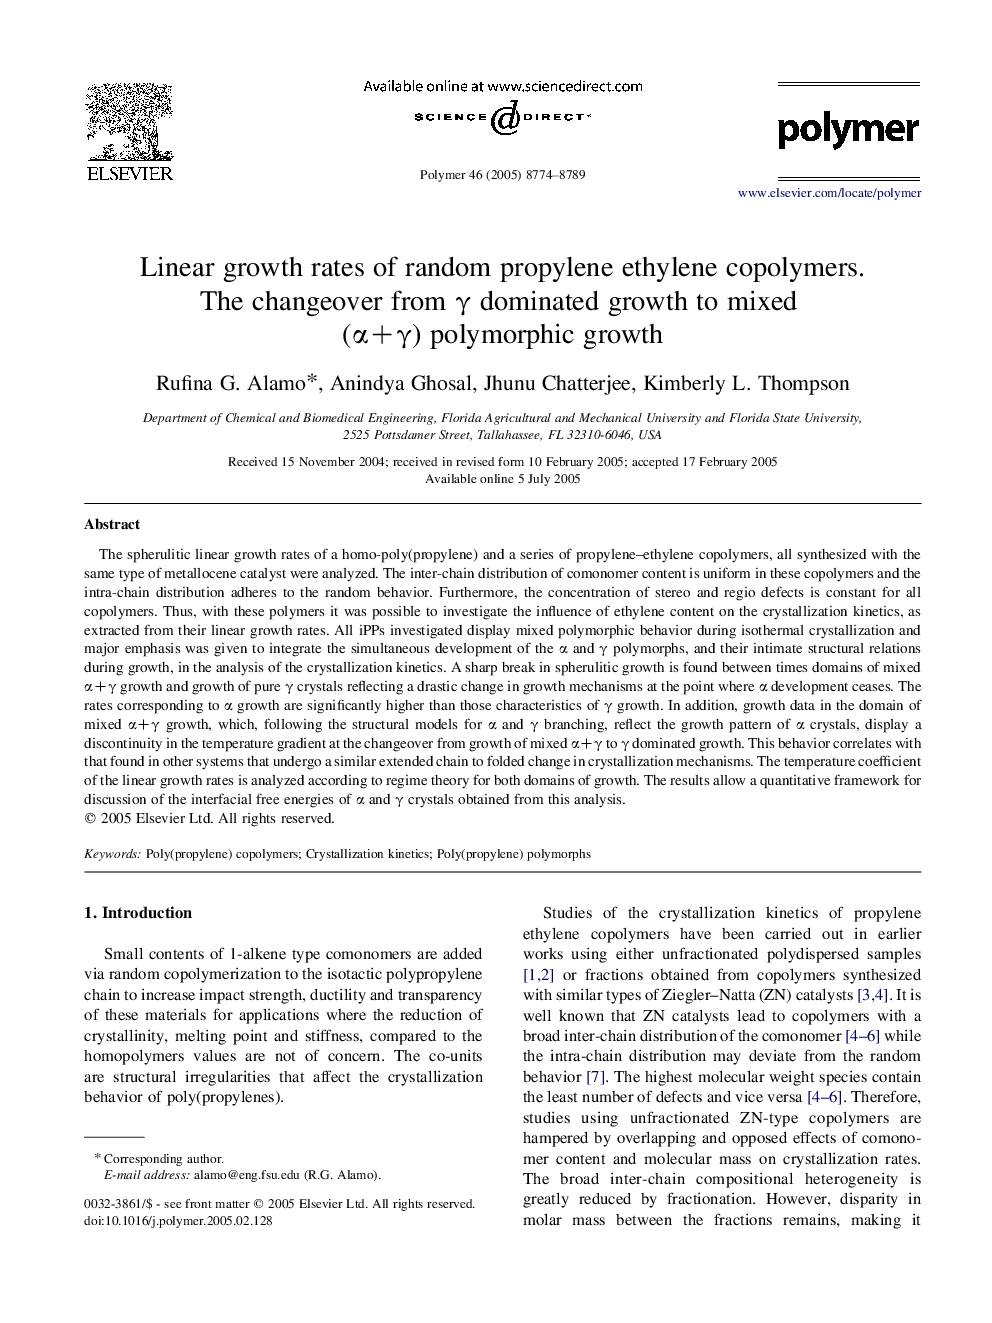 Linear growth rates of random propylene ethylene copolymers. The changeover from Î³ dominated growth to mixed (Î±+Î³) polymorphic growth